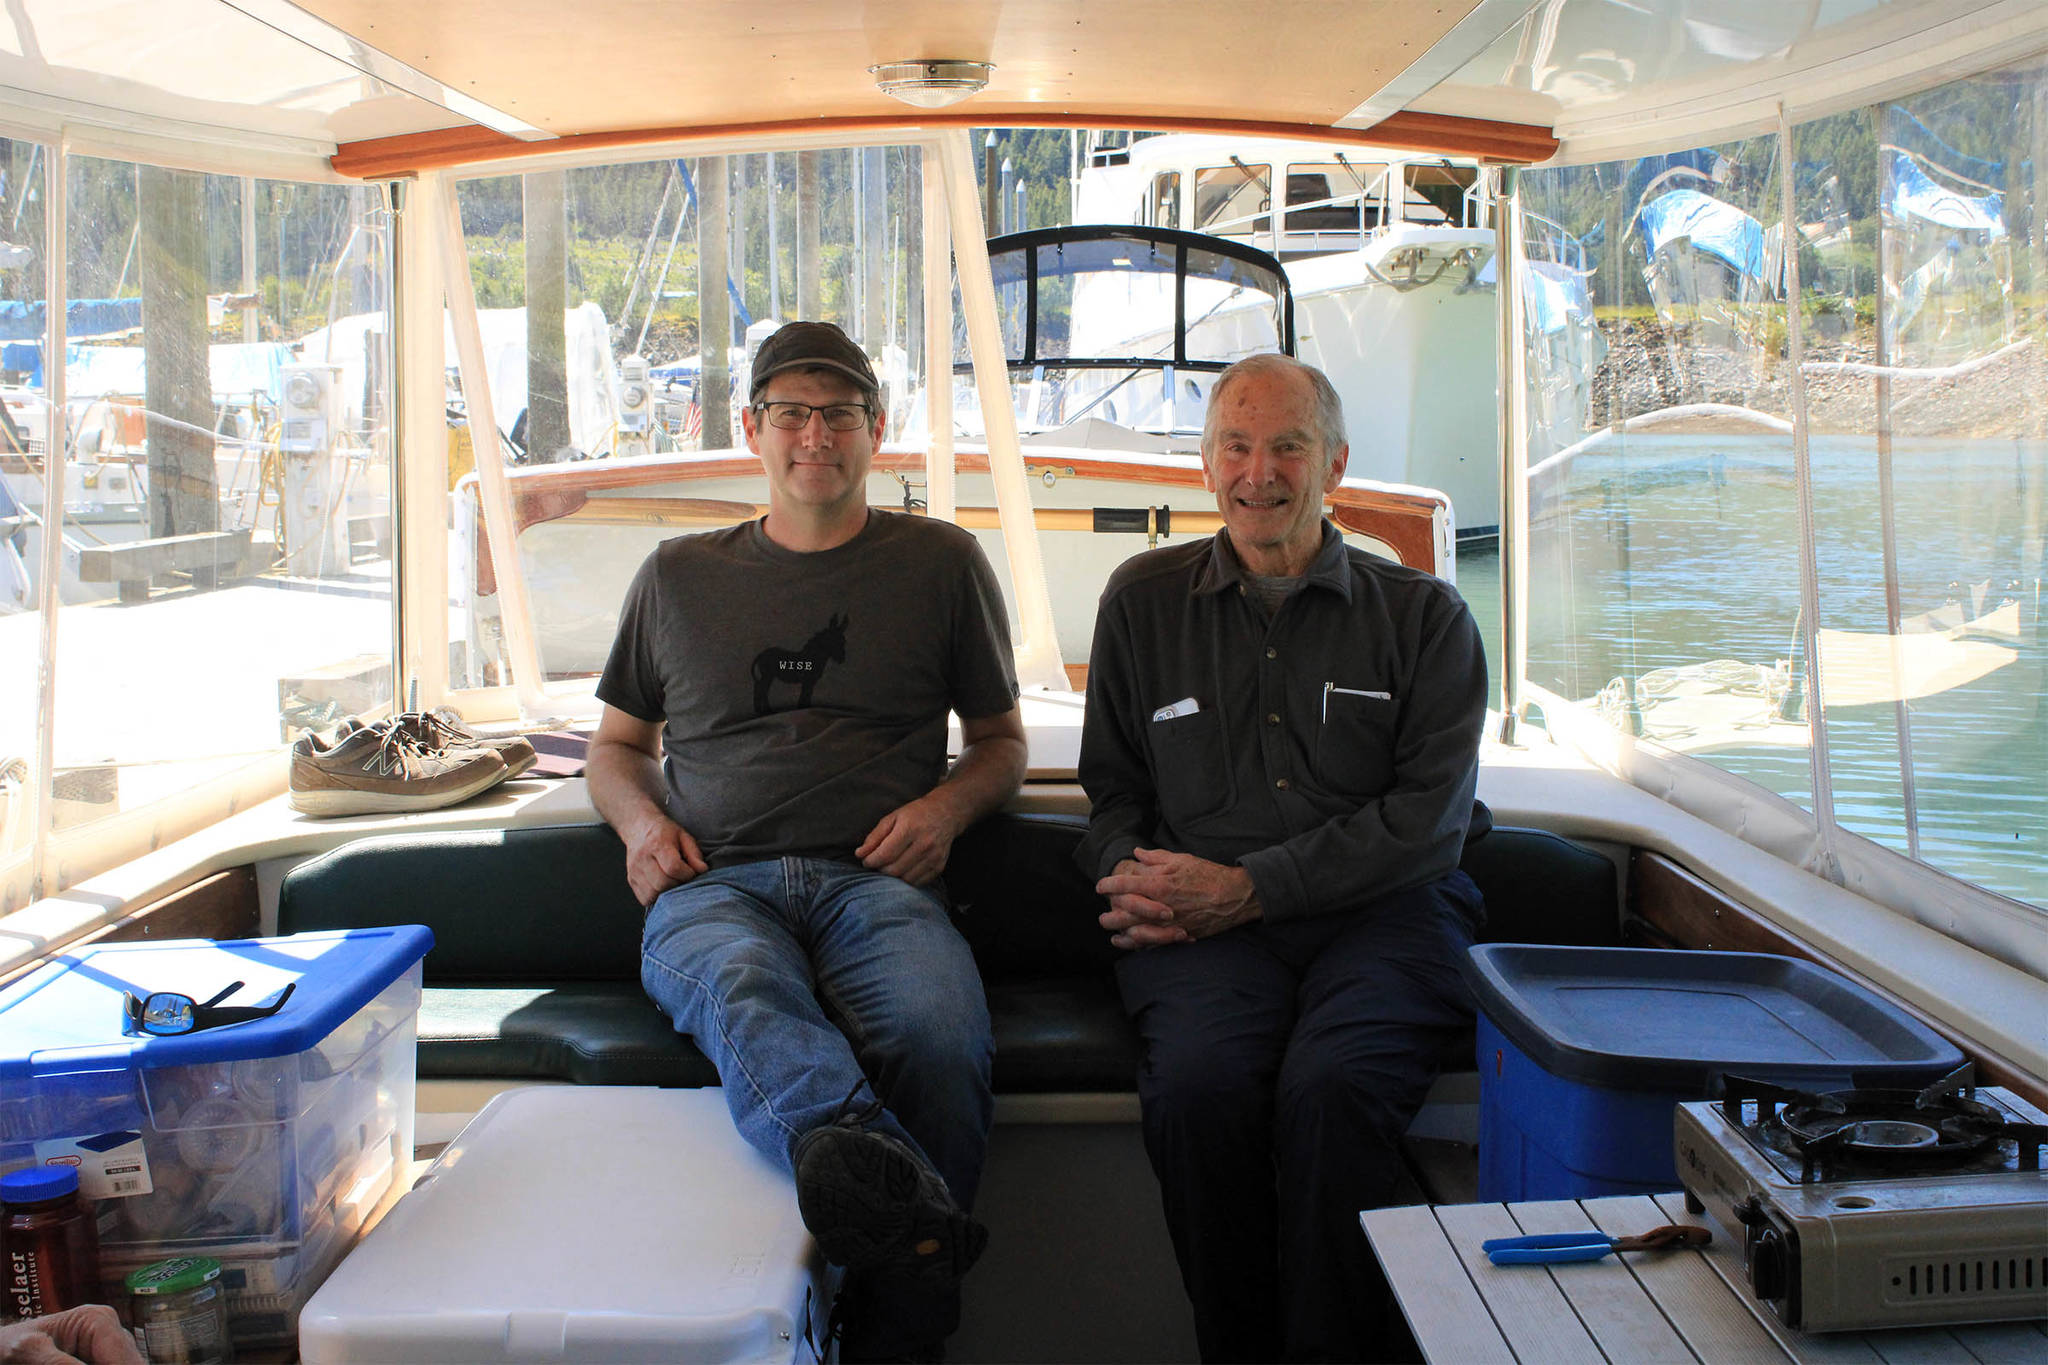 Alex Borton, left, and his father David Borton relax in the Wayward Sun, a solar-powered vessel designed by their company, Solar Sal Boats. The pair stopped in Juneau Sunday, June 27 as part of their quest to traverse Alaska’s Inside Passage in a solar-powered vessel. (Dana Zigmund/Juneau Empire)